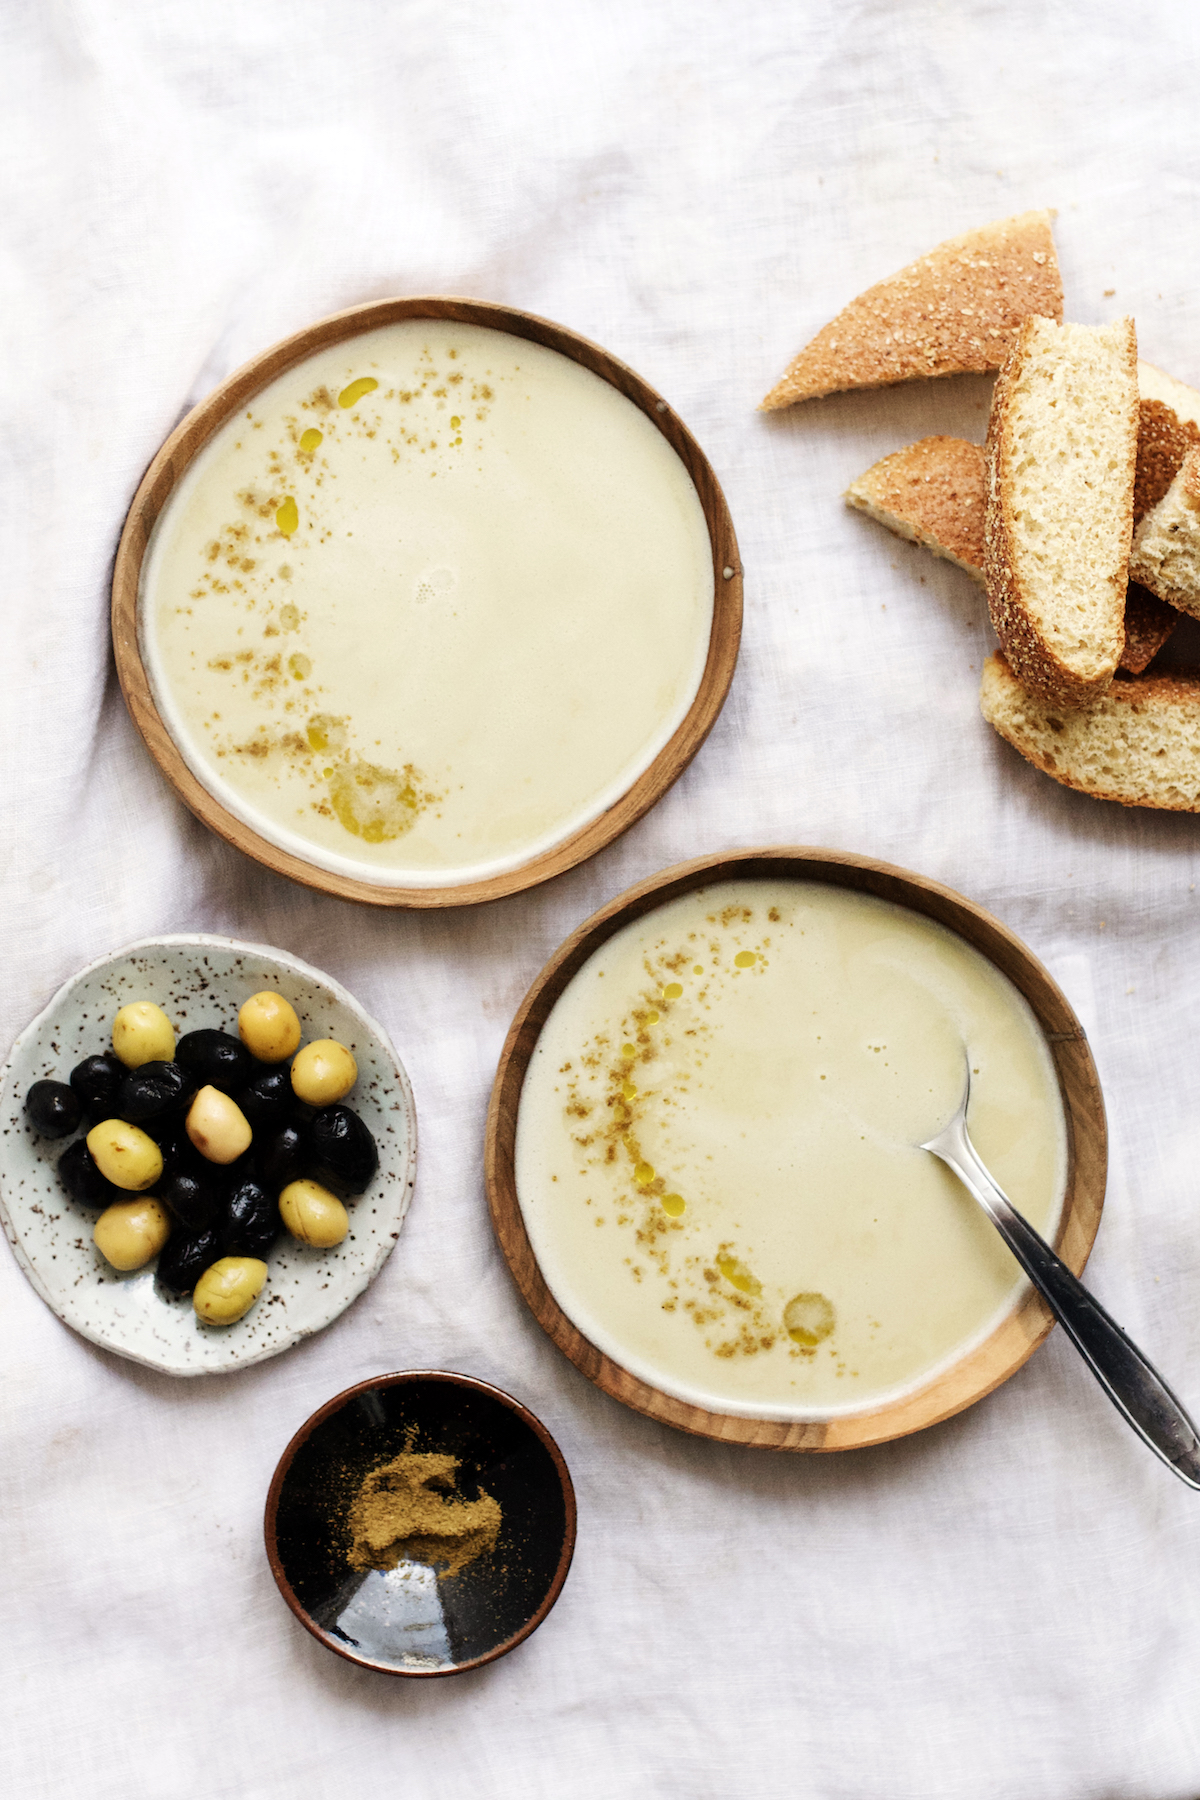 Study finds Ozempic cuts risk of chronic kidney disease complications, Epidurals linked to reduction in serious complications after childbirth, Moroccan Fava Bean Soup